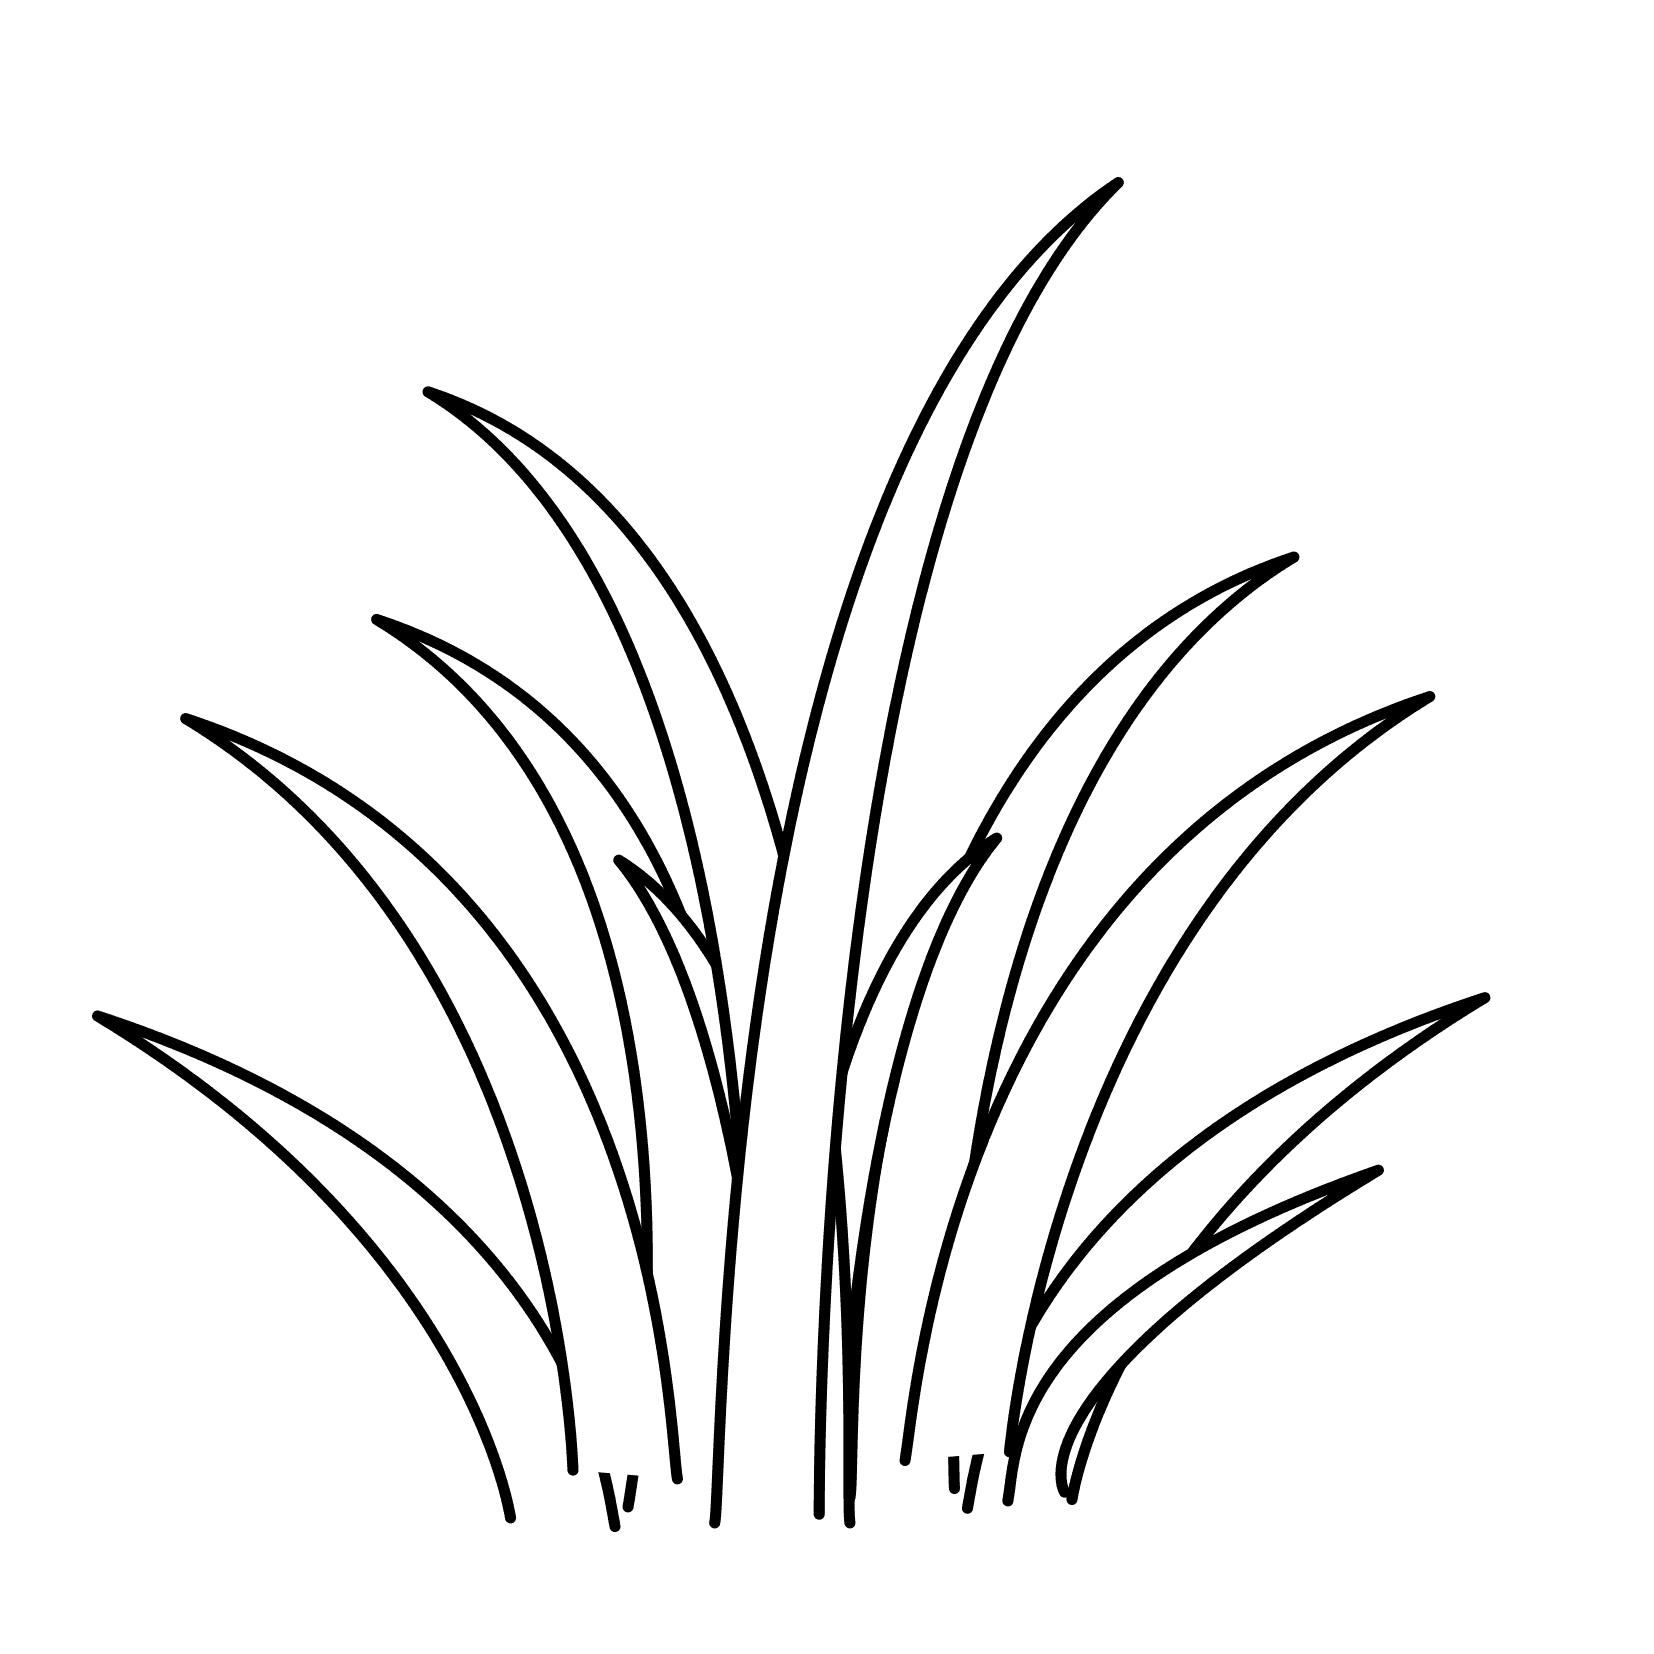 Coloring Pages Of Grass - ClipArt Best